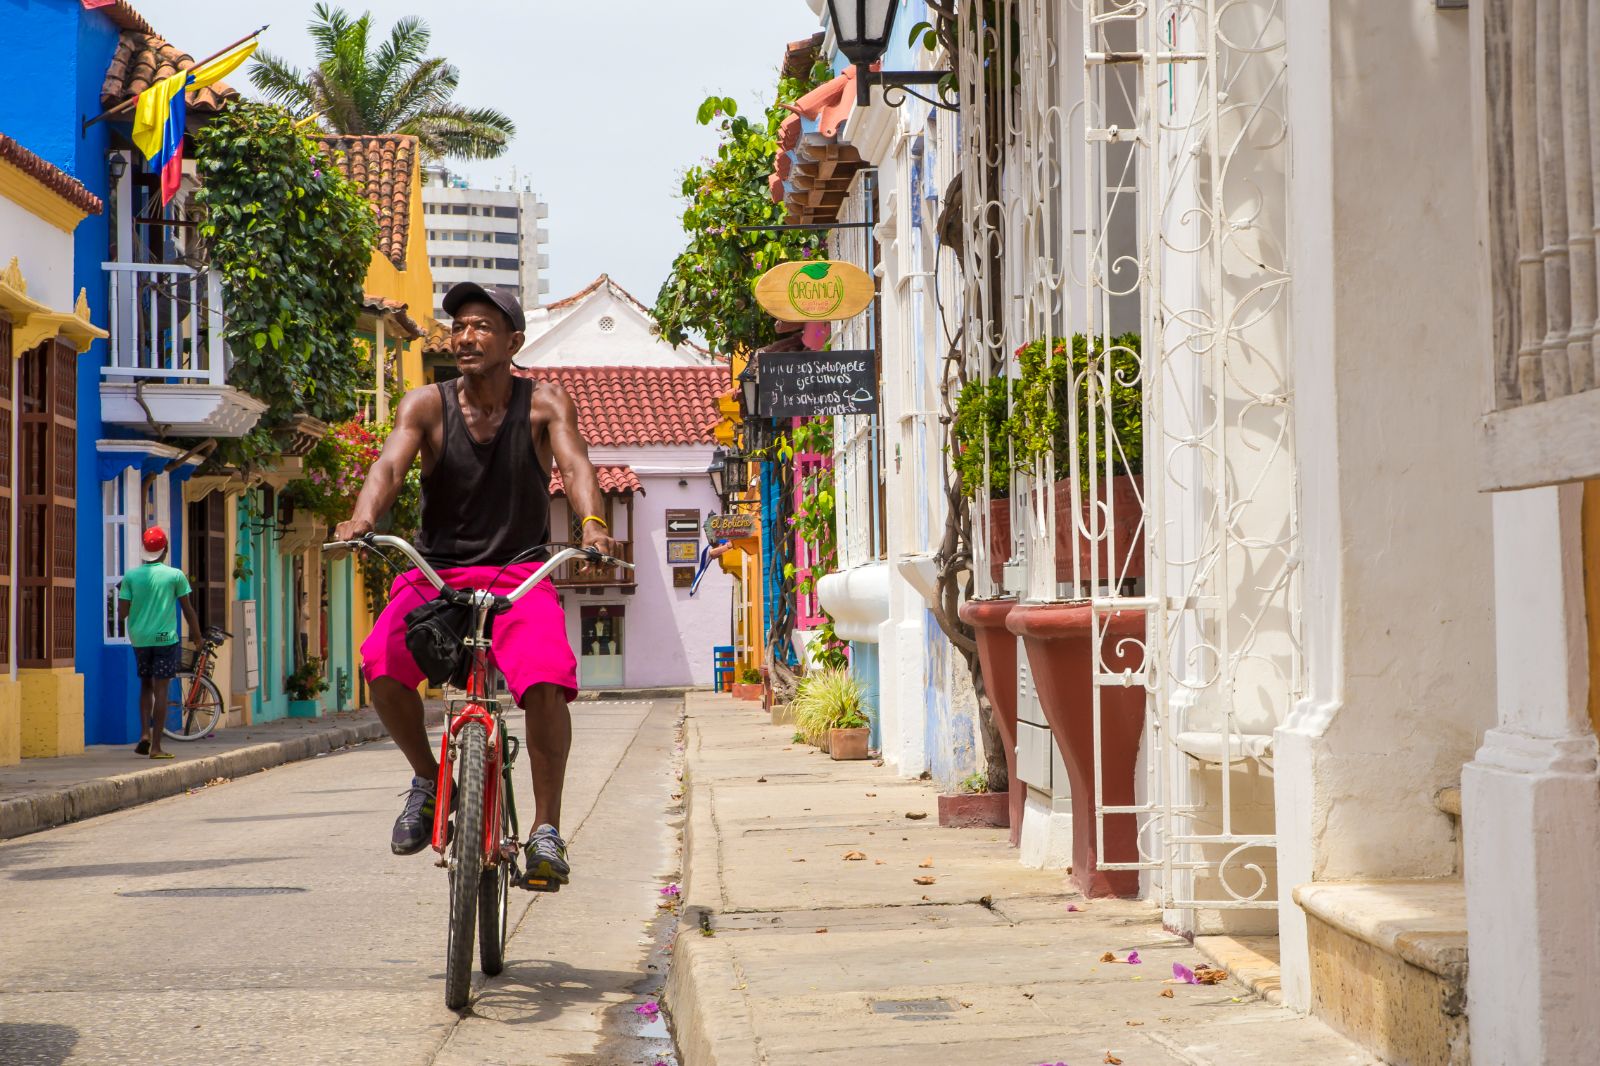 Local man cycling in the colourful streets of Cartagena, Colombia